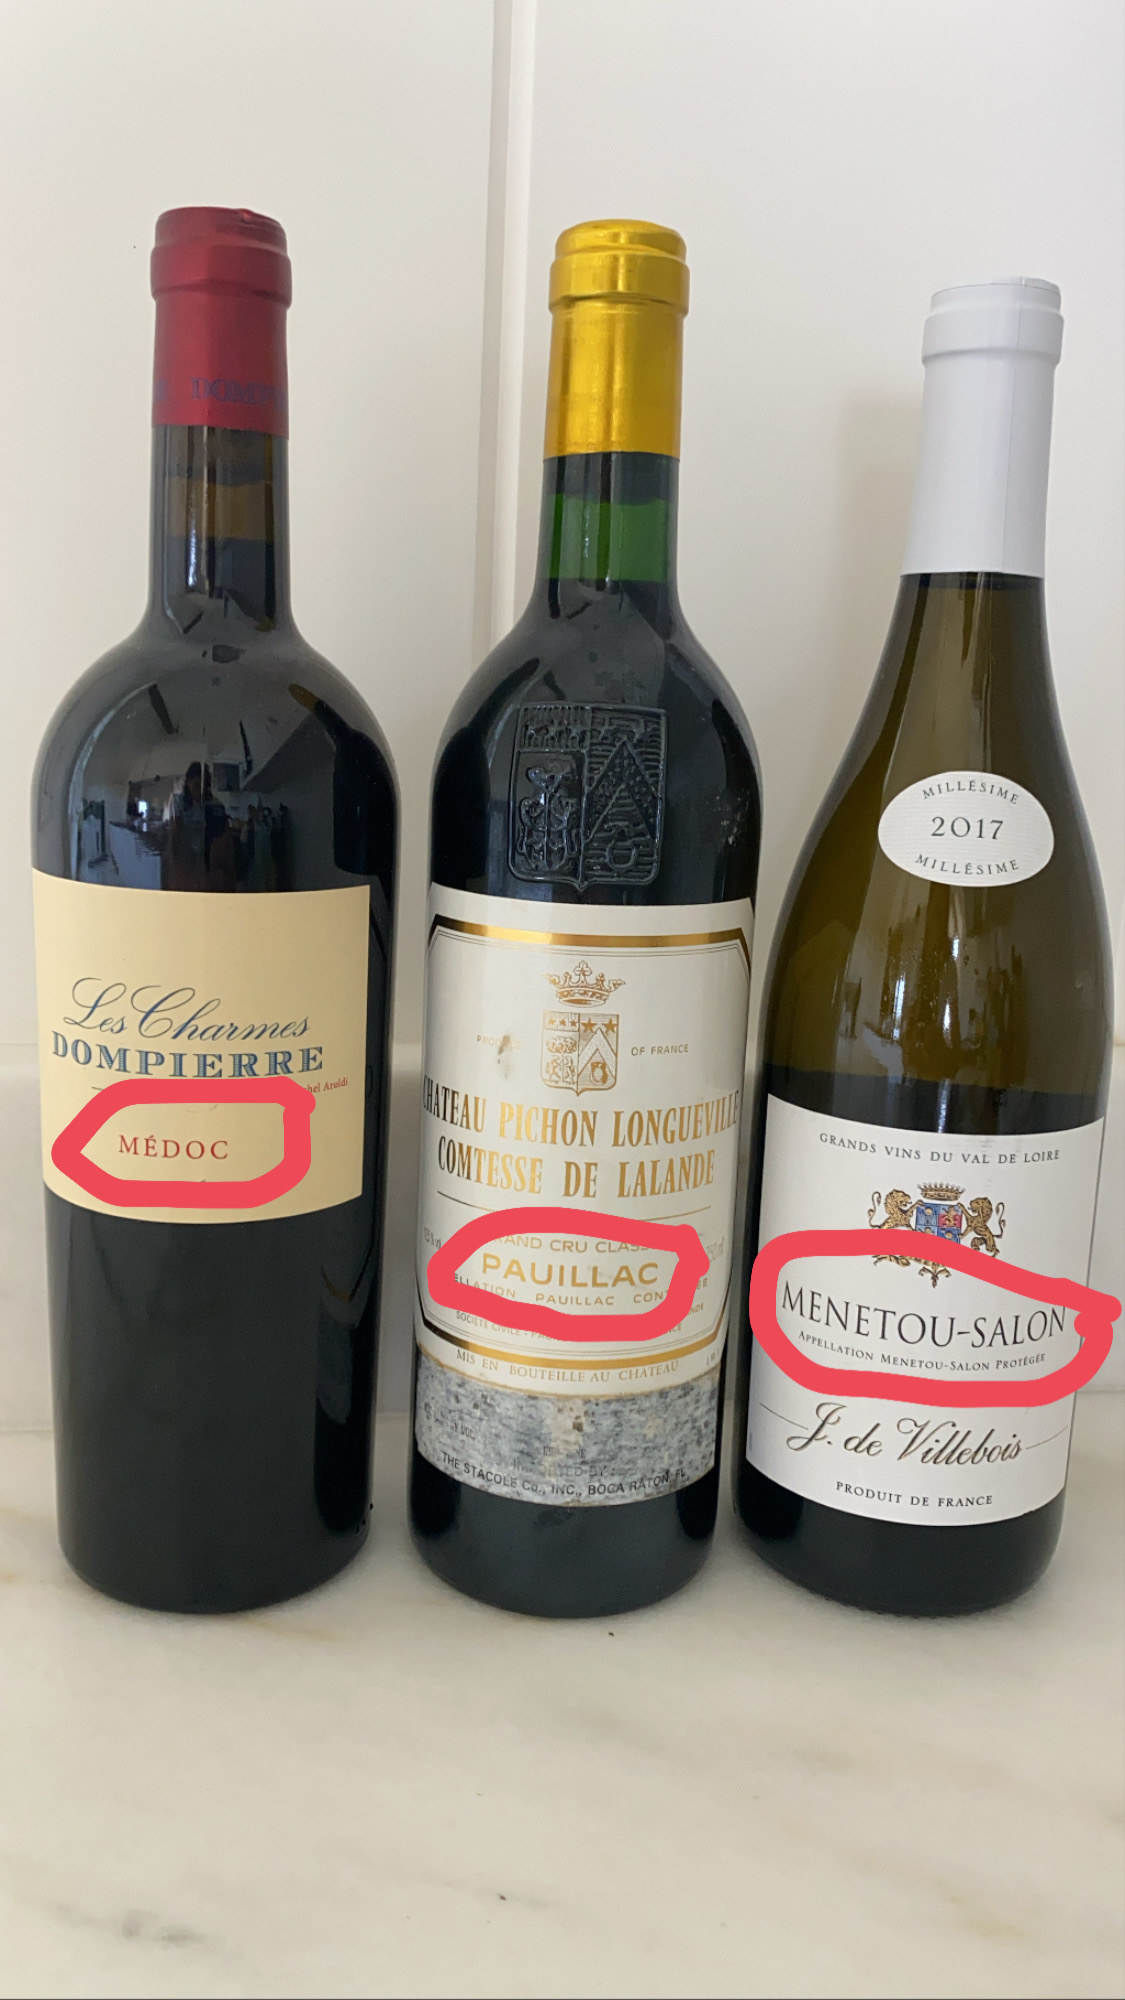 Three bottles of wine from France with their appellation (AOC) circled in pink.